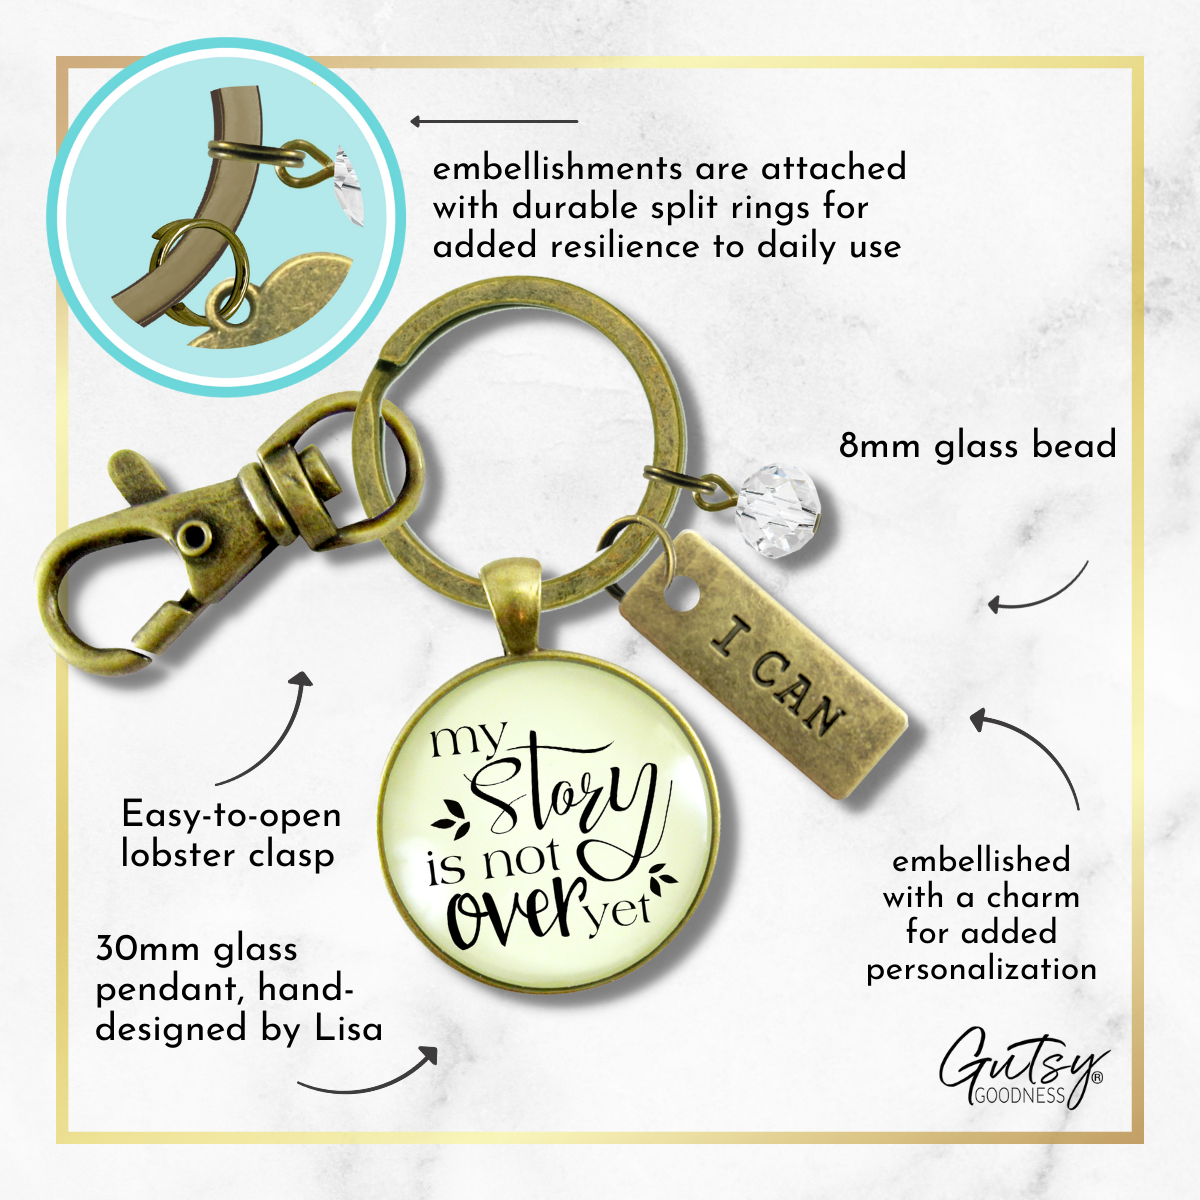 My Story Isn't Over Yet Keychain Men women Positive Mantra Survivor Quote Warrior Jewelry - Gutsy Goodness Handmade Jewelry;My Story Isn't Over Yet Keychain Men Women Positive Mantra Survivor Quote Warrior Jewelry - Gutsy Goodness Handmade Jewelry Gifts